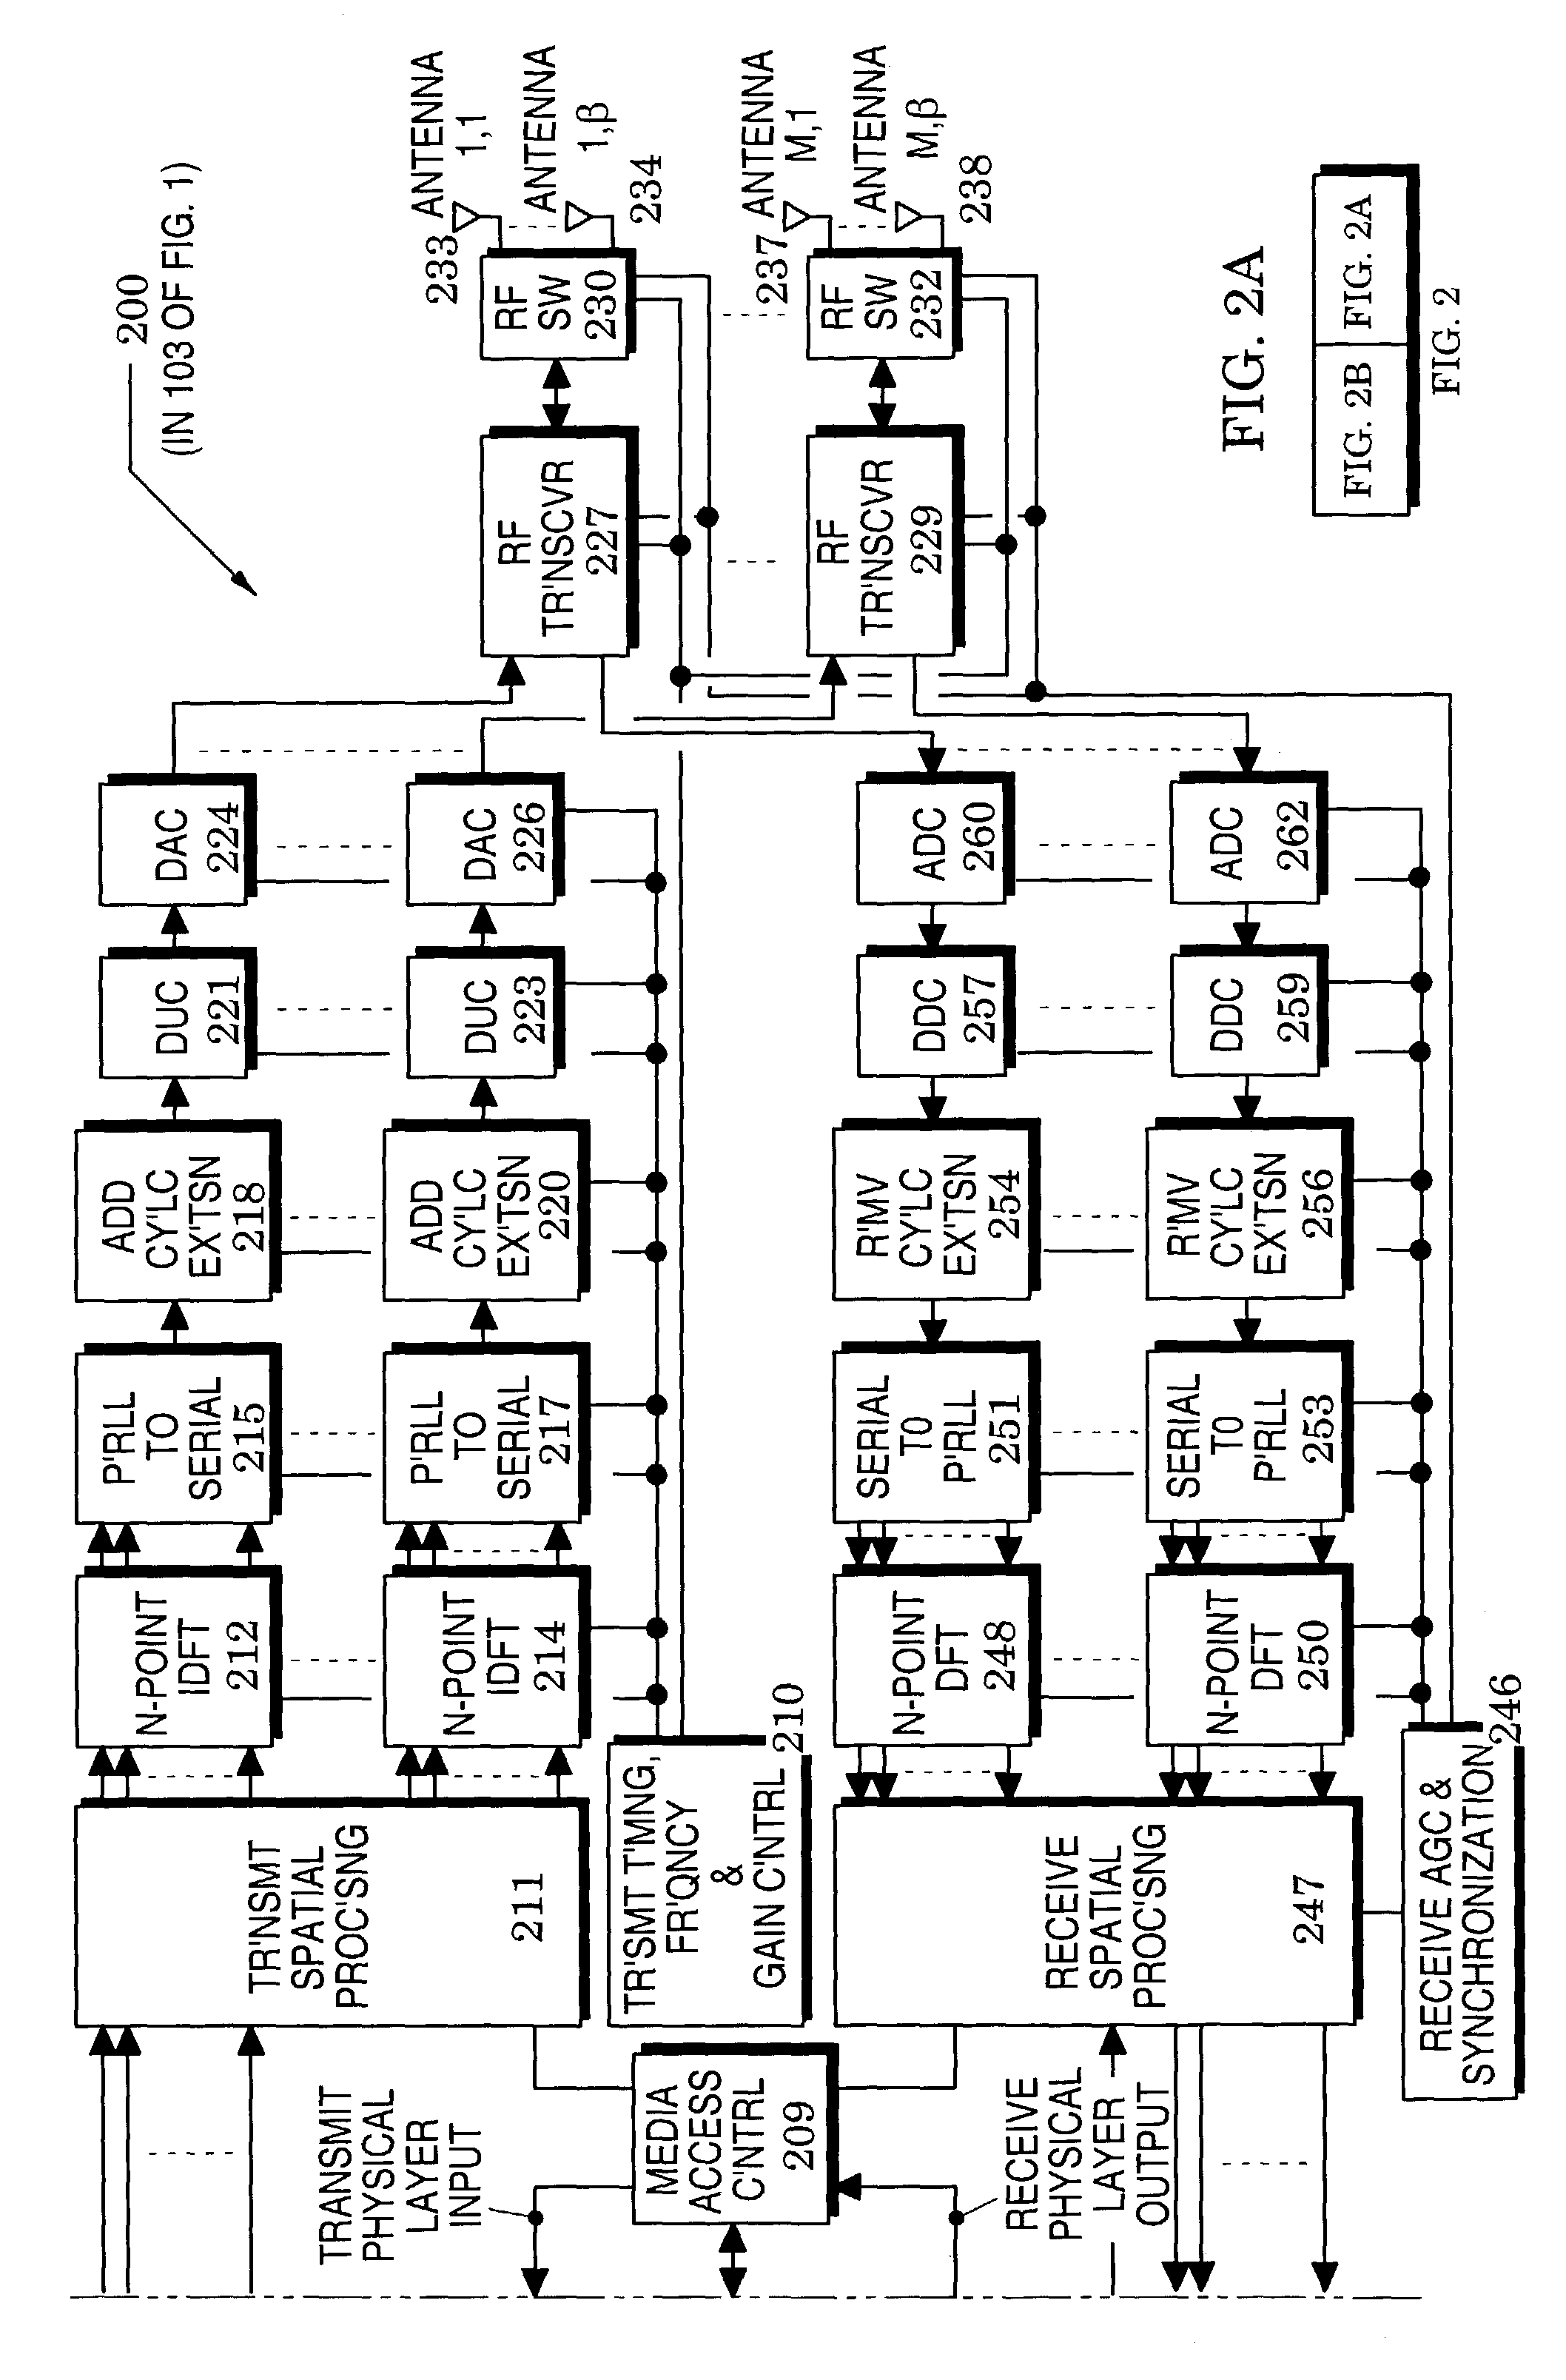 Wireless communications structures and methods utilizing frequency domain spatial processing